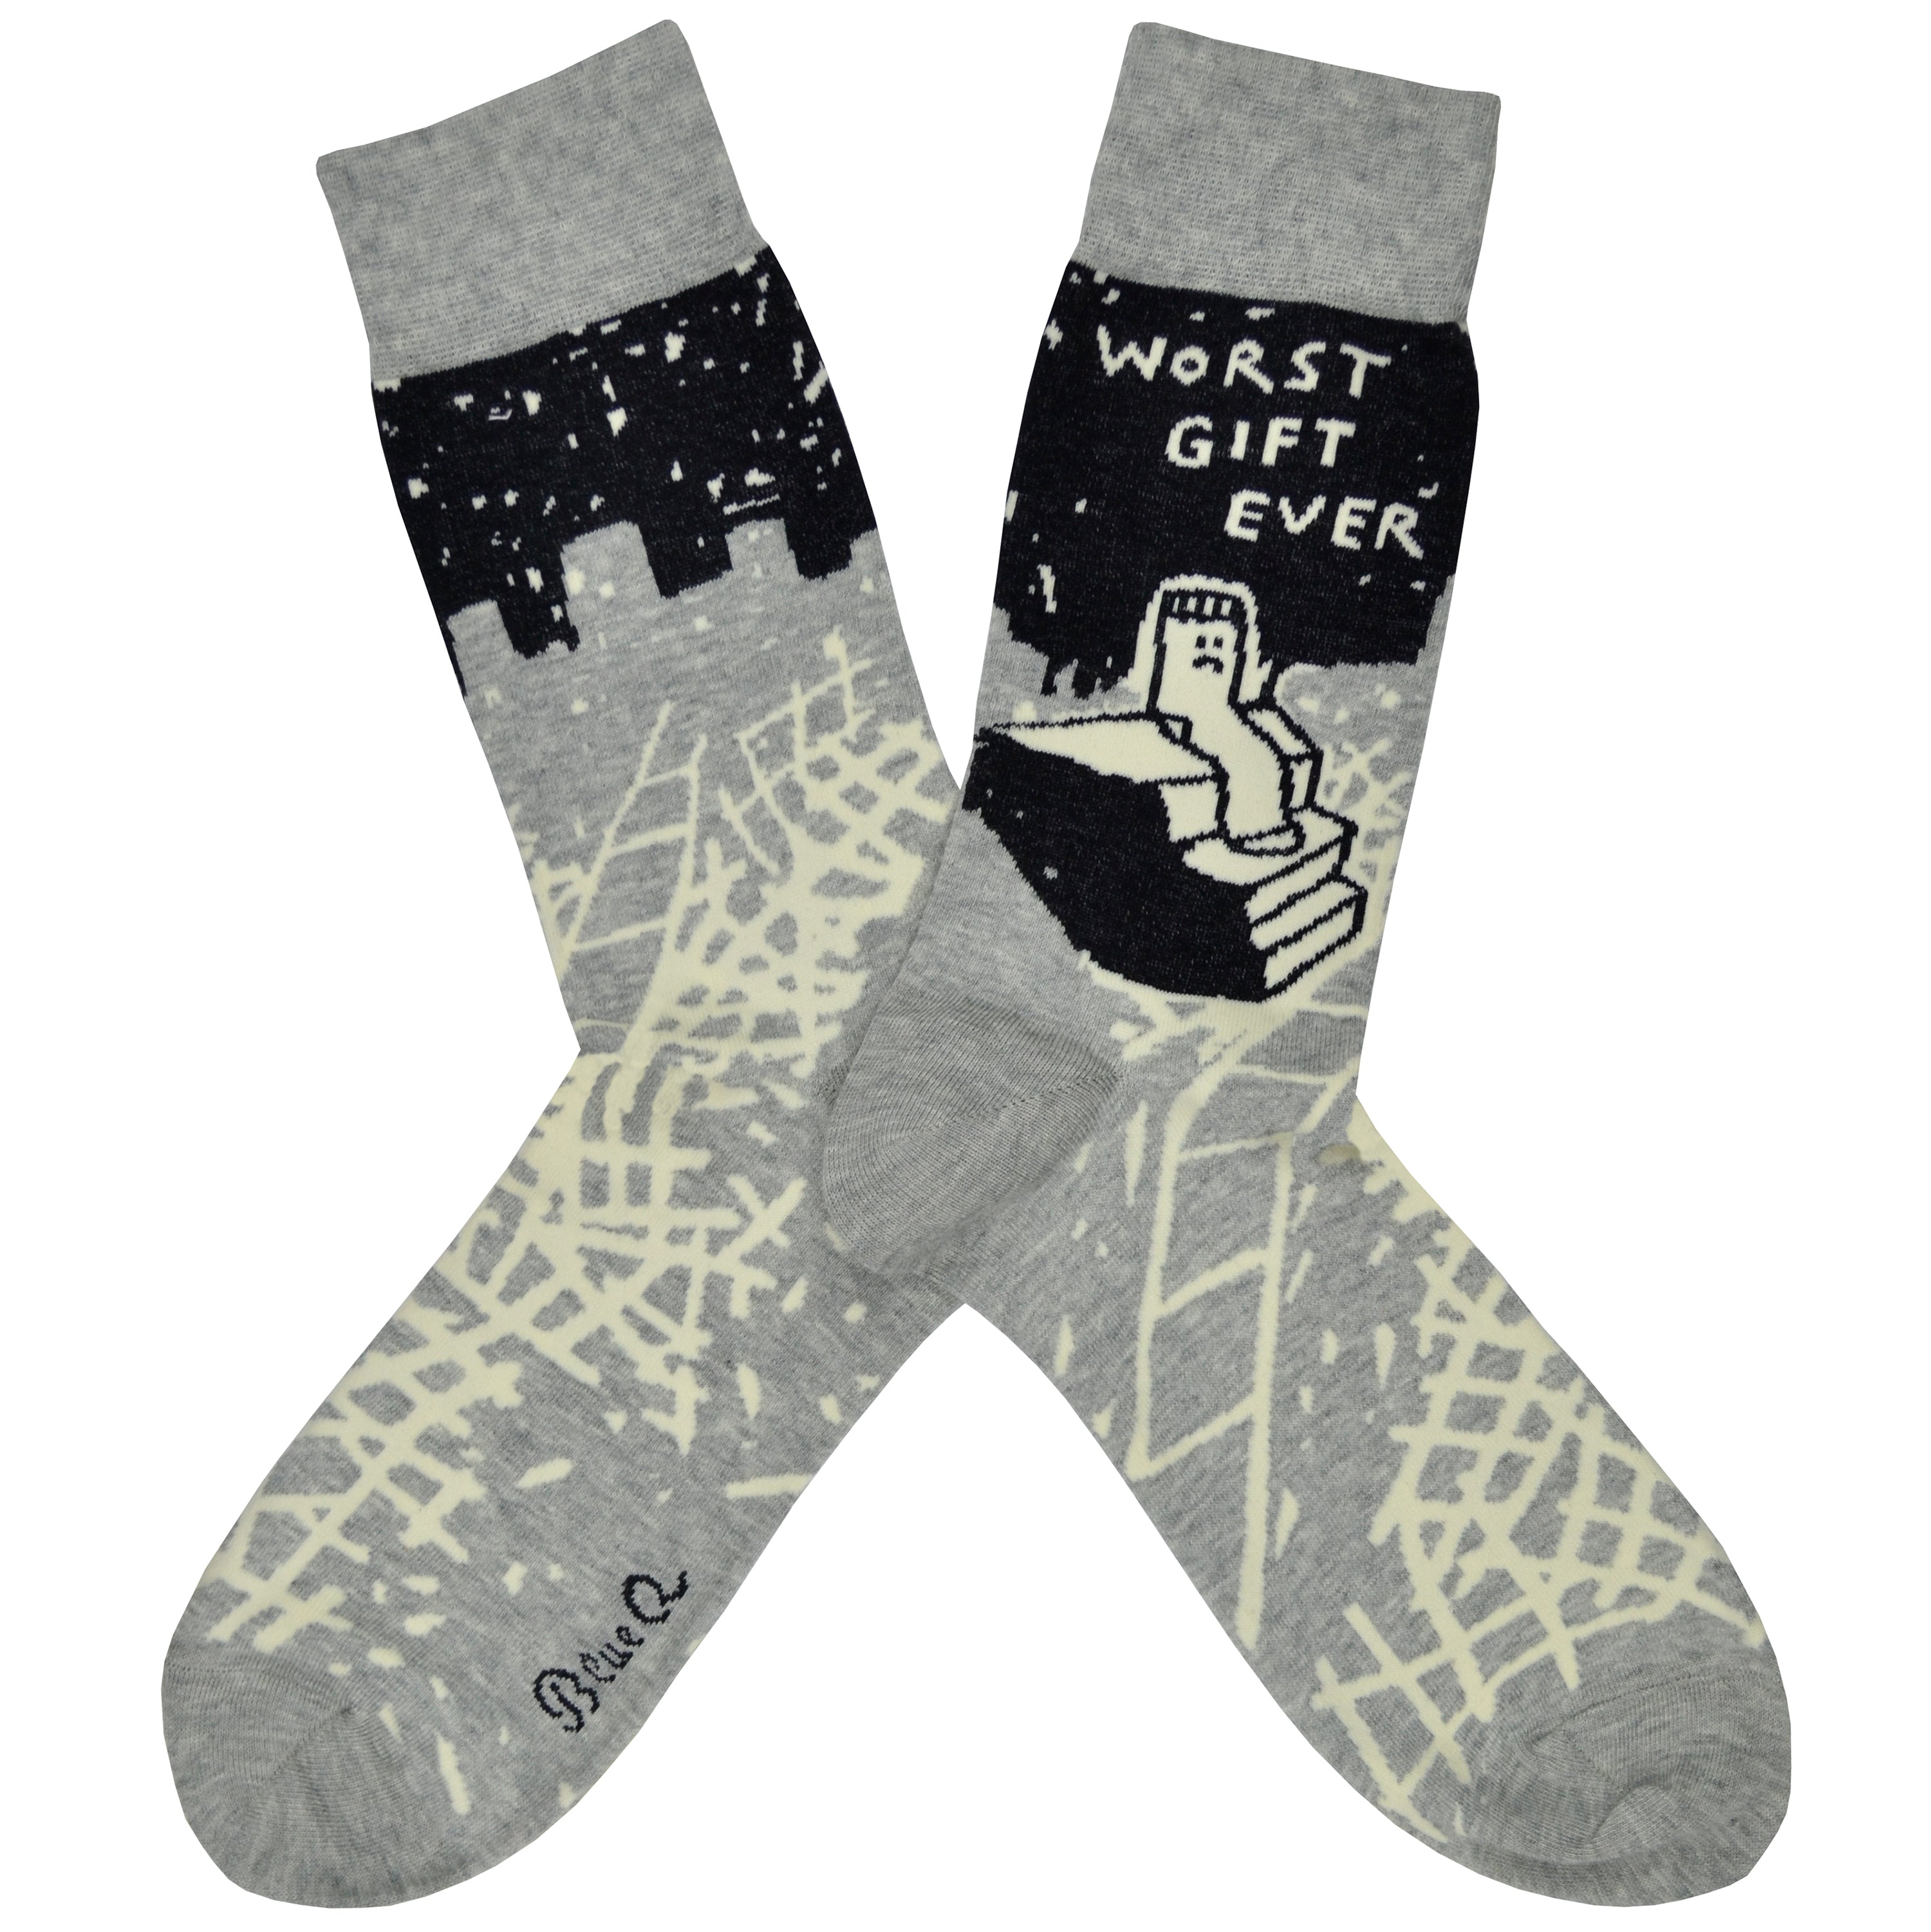 Shown in a flaylay, a pair of Blue Q brand men's cotton crew socks in grey and black with an abstract crisscross design along the foot and a sad sock sitting on stairs on the leg. The text on the sock reads, 